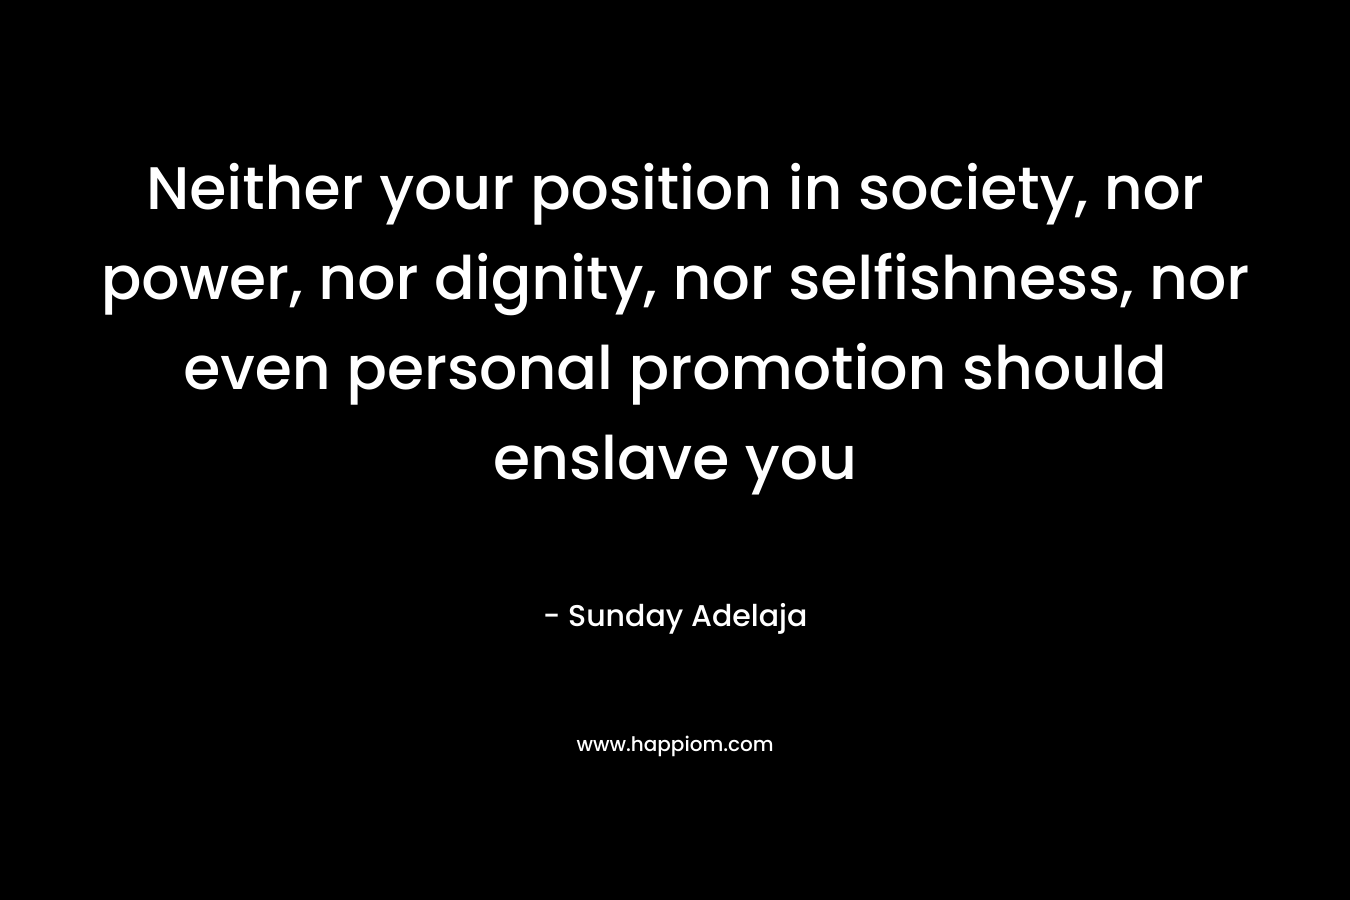 Neither your position in society, nor power, nor dignity, nor selfishness, nor even personal promotion should enslave you